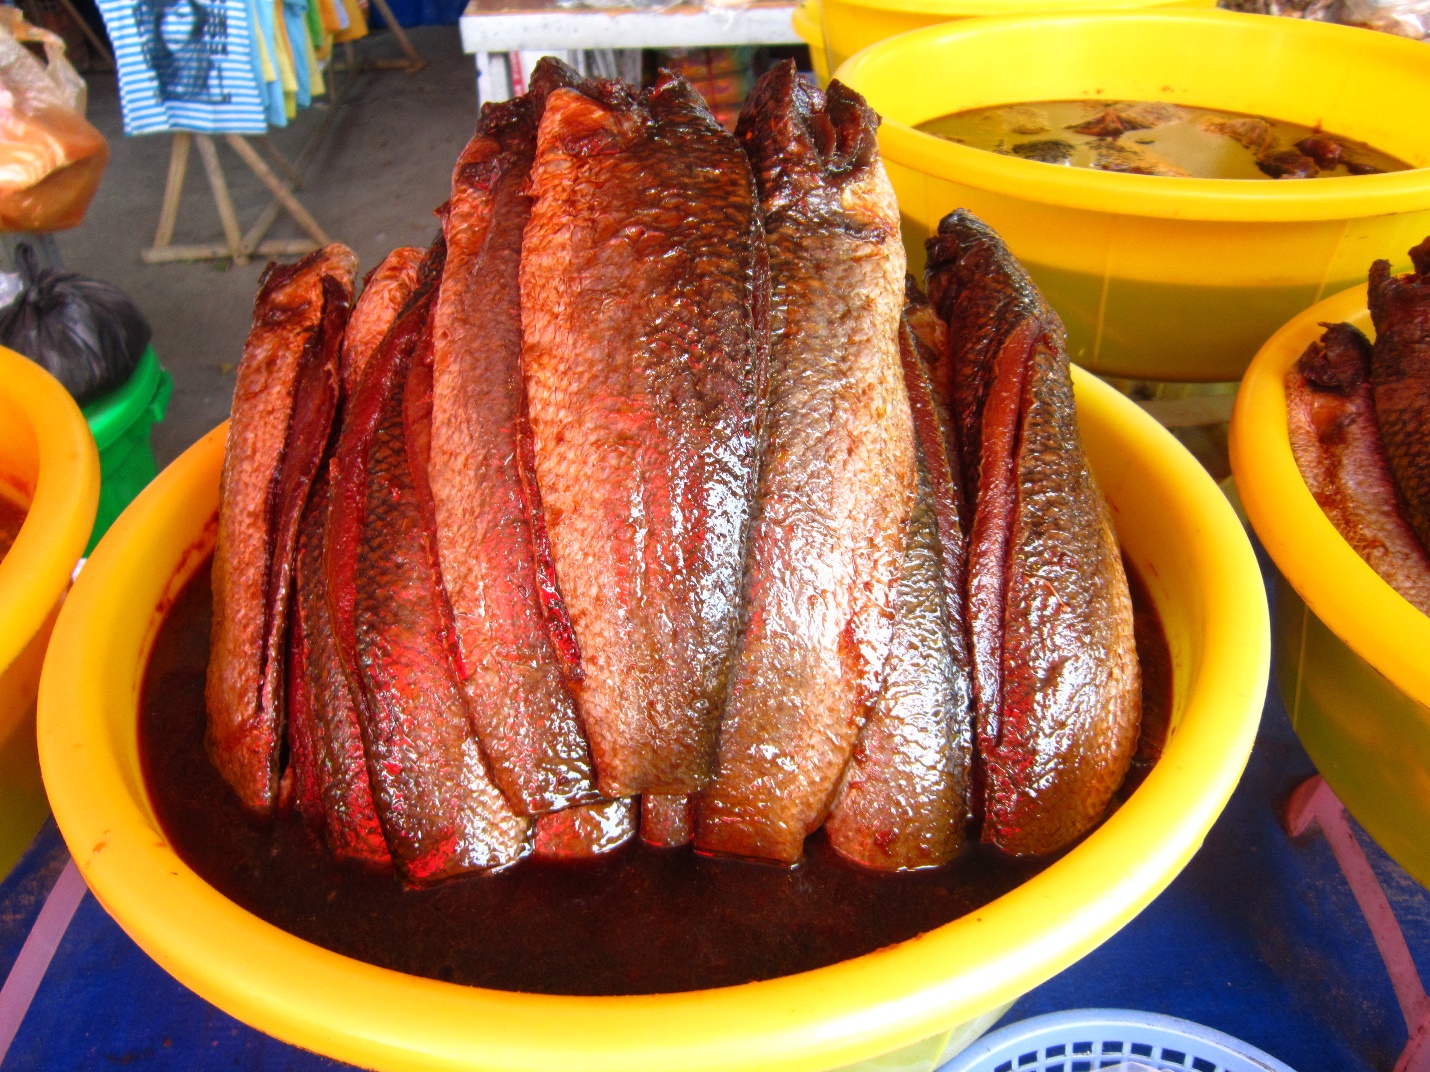 Mam is made from fresh fish in Chau Doc market